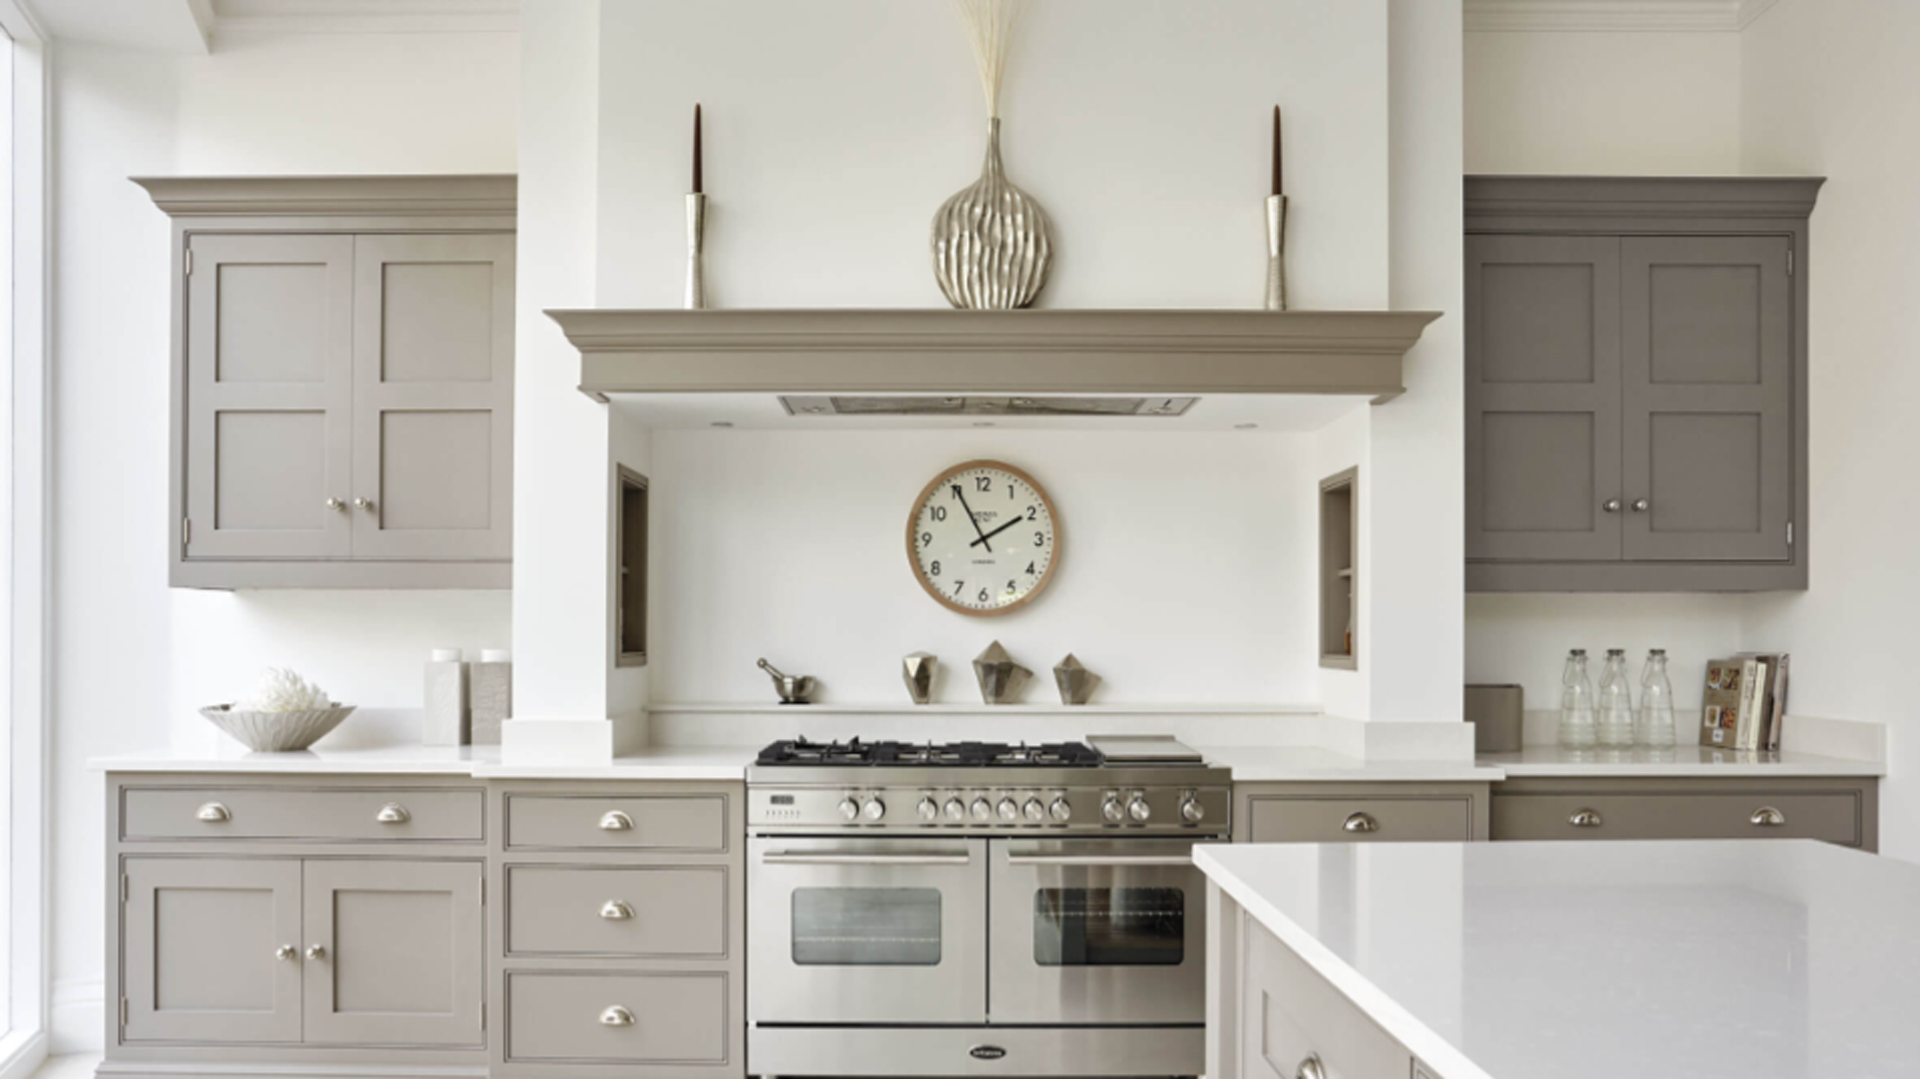 Grey Shaker kitchen with stainless steel rangemaster oven and round wall clock